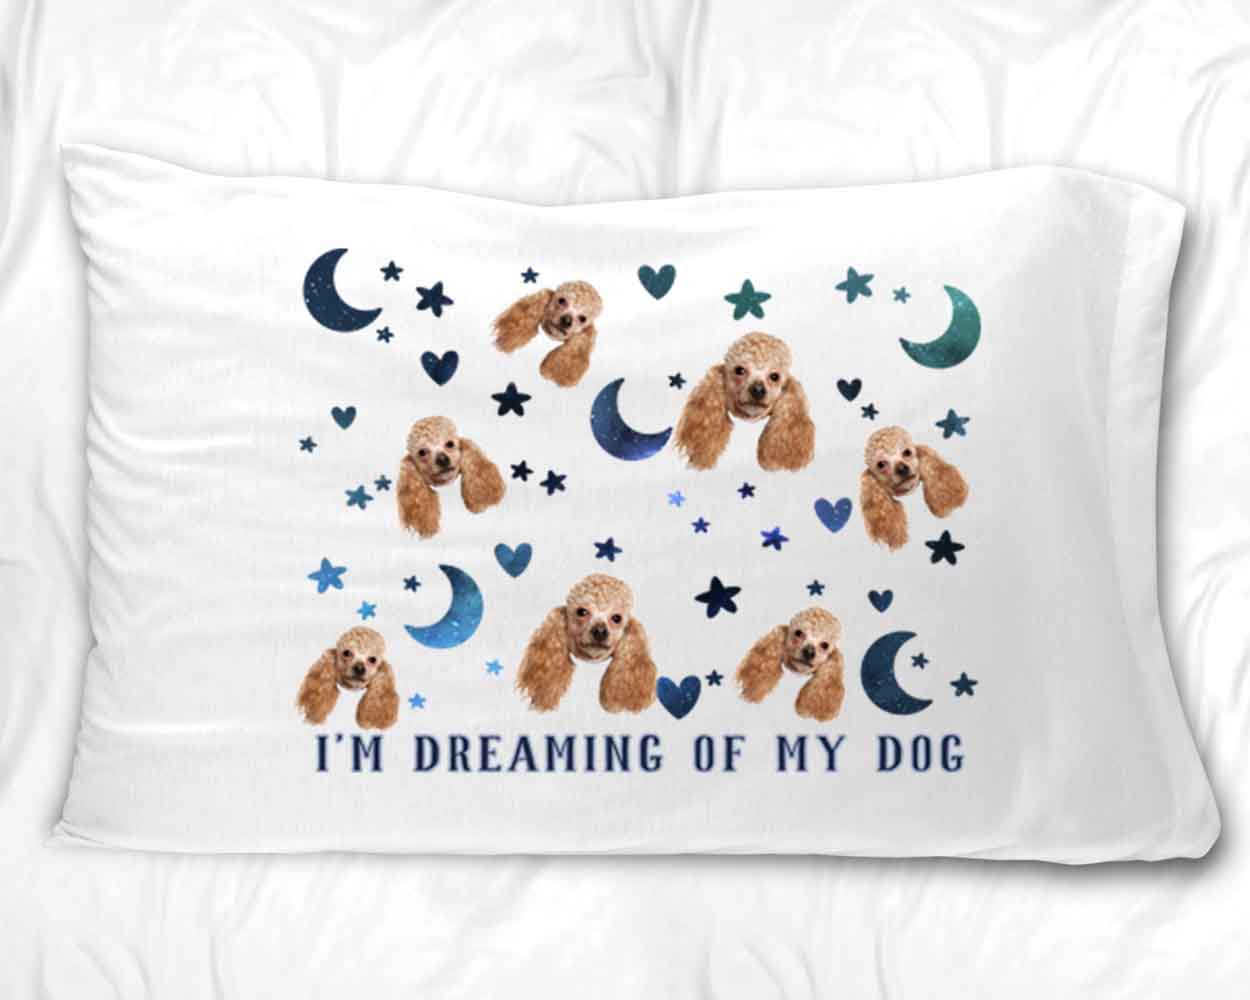 I'm dreaming of my dog and your pets photo face cropped in all over design makes a unique gift for your daughter.